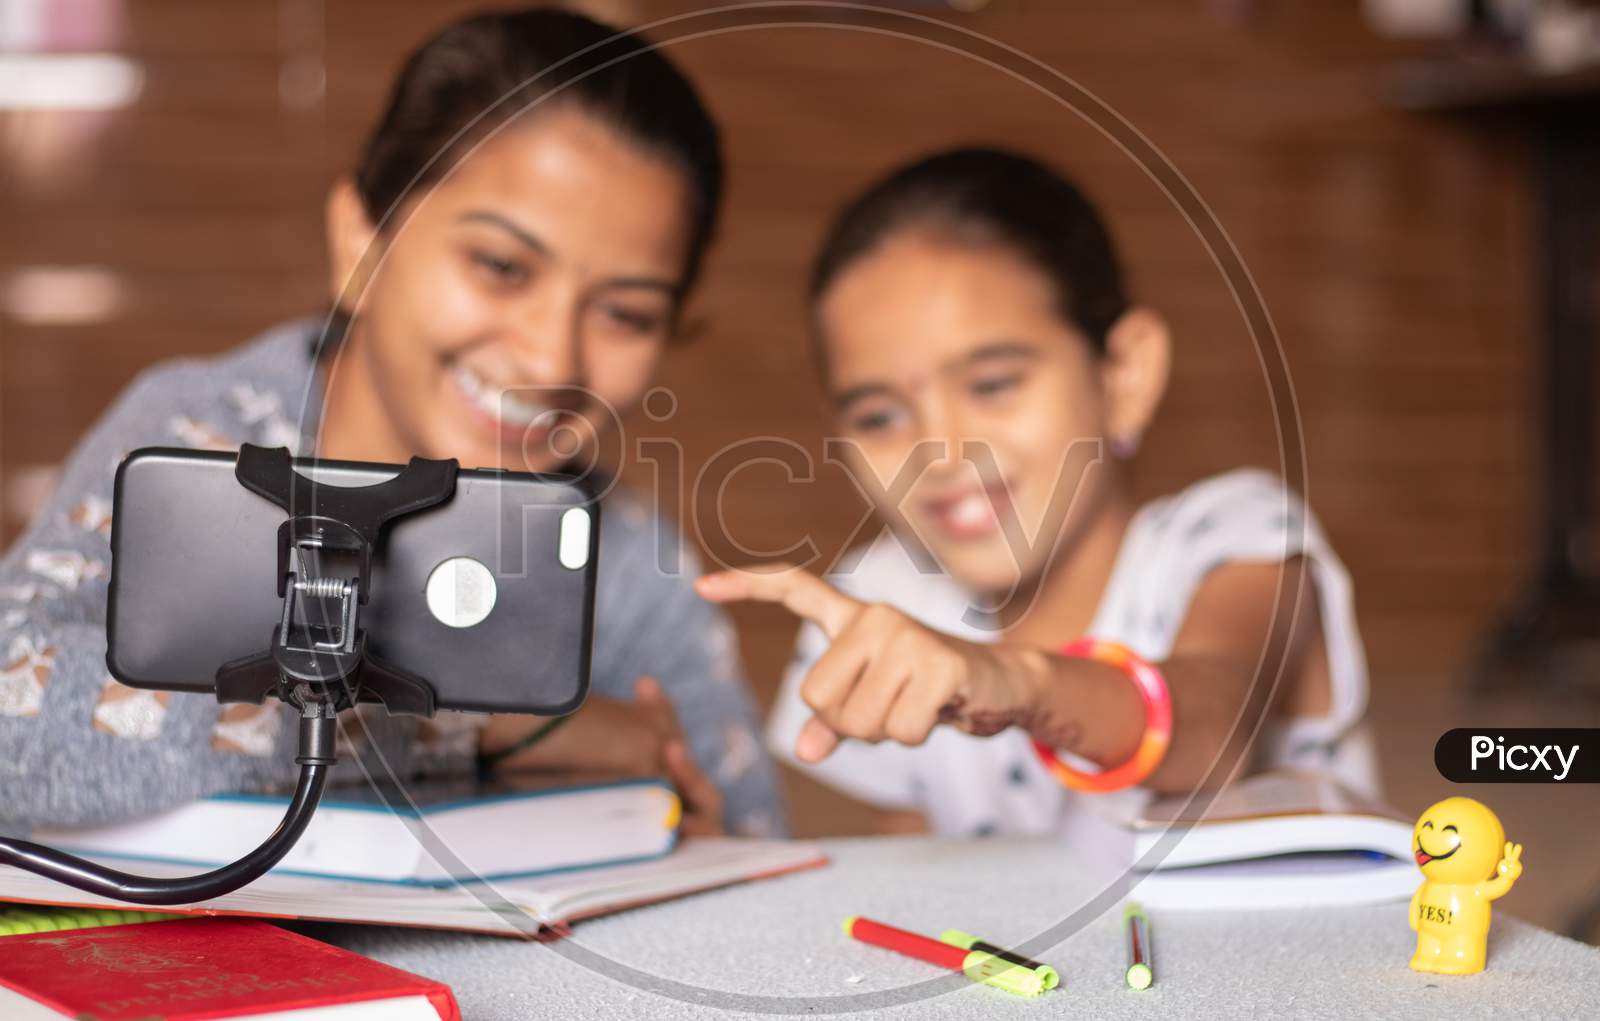 Young Girl Teaching Her Sister At Home - Concept Of Online Homeschooling During Coronavirus Or Covid-19 Lockdown Pandemic